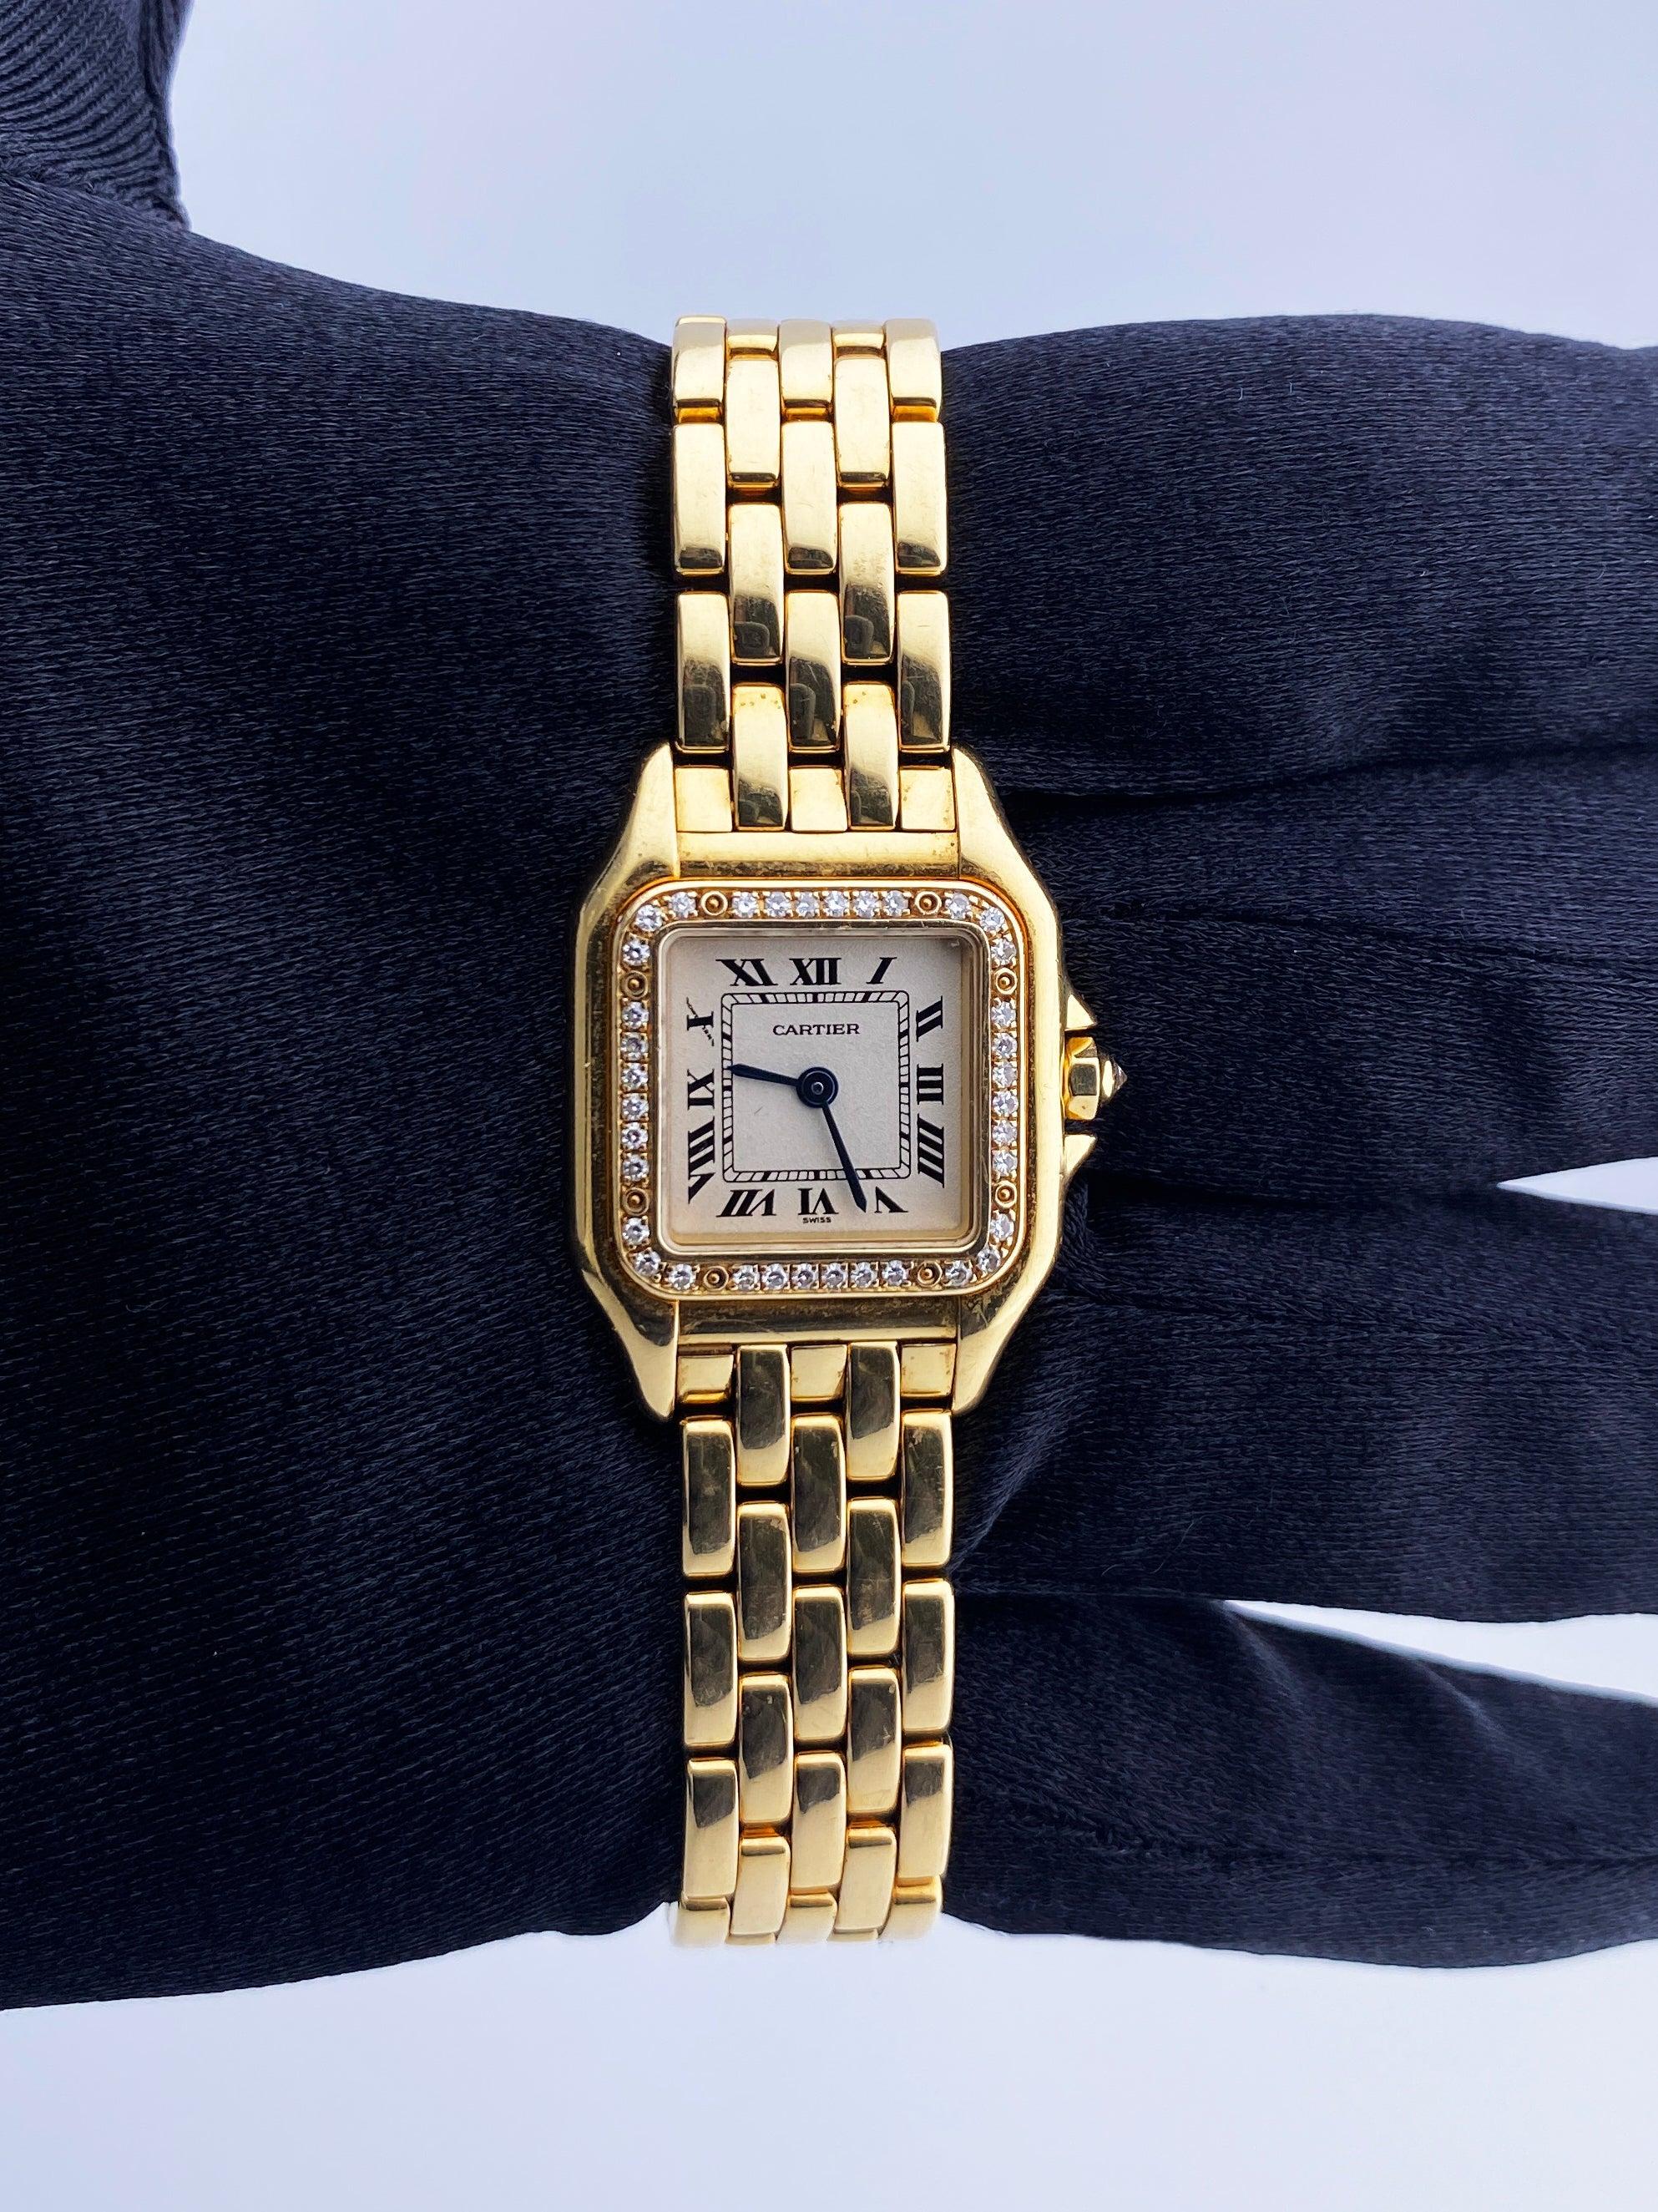 Cartier Panthere 1280 Ladies Watch. 22mm 18K yellow gold case with original factory diamond set bezel. Off-white dial with blue hands and black Roman numeral hour marker. Minute markers on the inner dial. 18K yellow gold bracelet with hidden